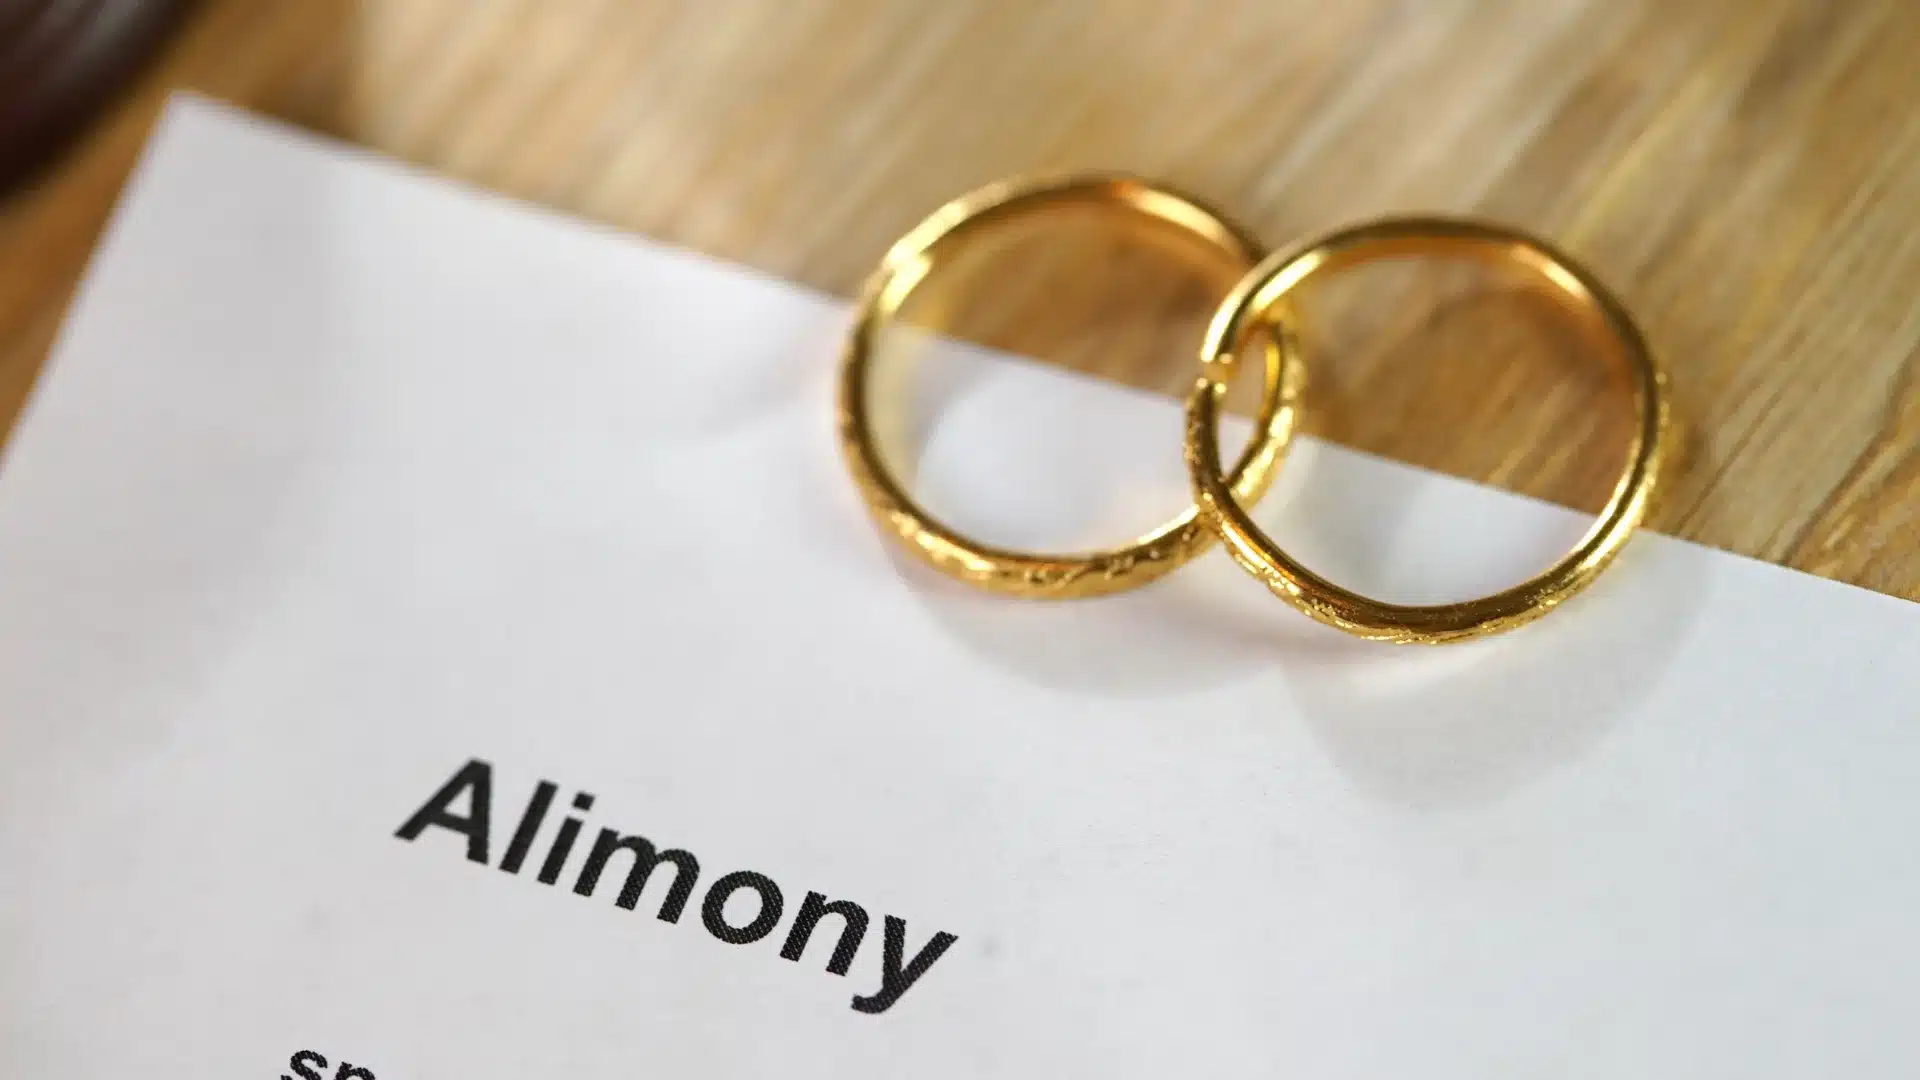 Who Pays Alimony in a Divorce image raw